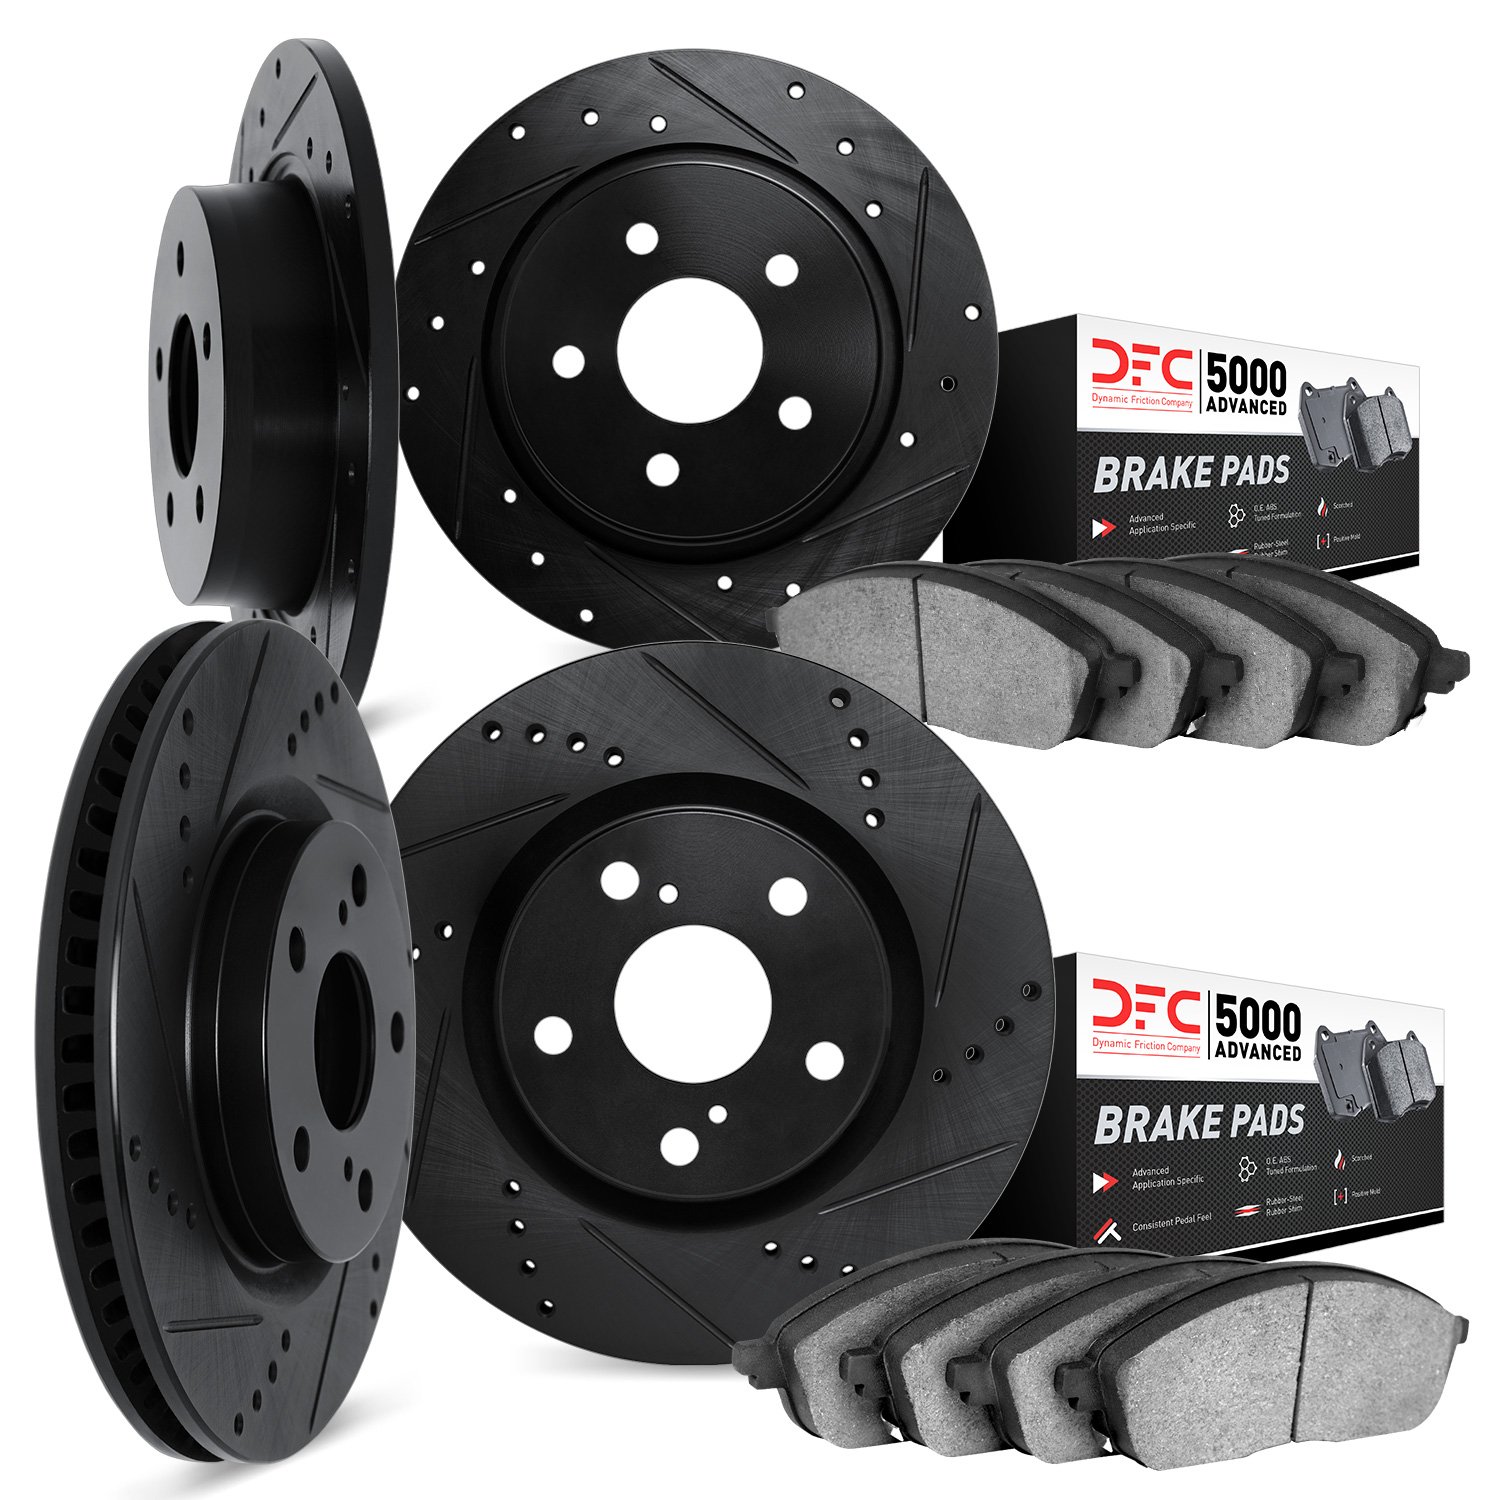 8504-27005 Drilled/Slotted Brake Rotors w/5000 Advanced Brake Pads Kit [Black], 2012-2013 Volvo, Position: Front and Rear